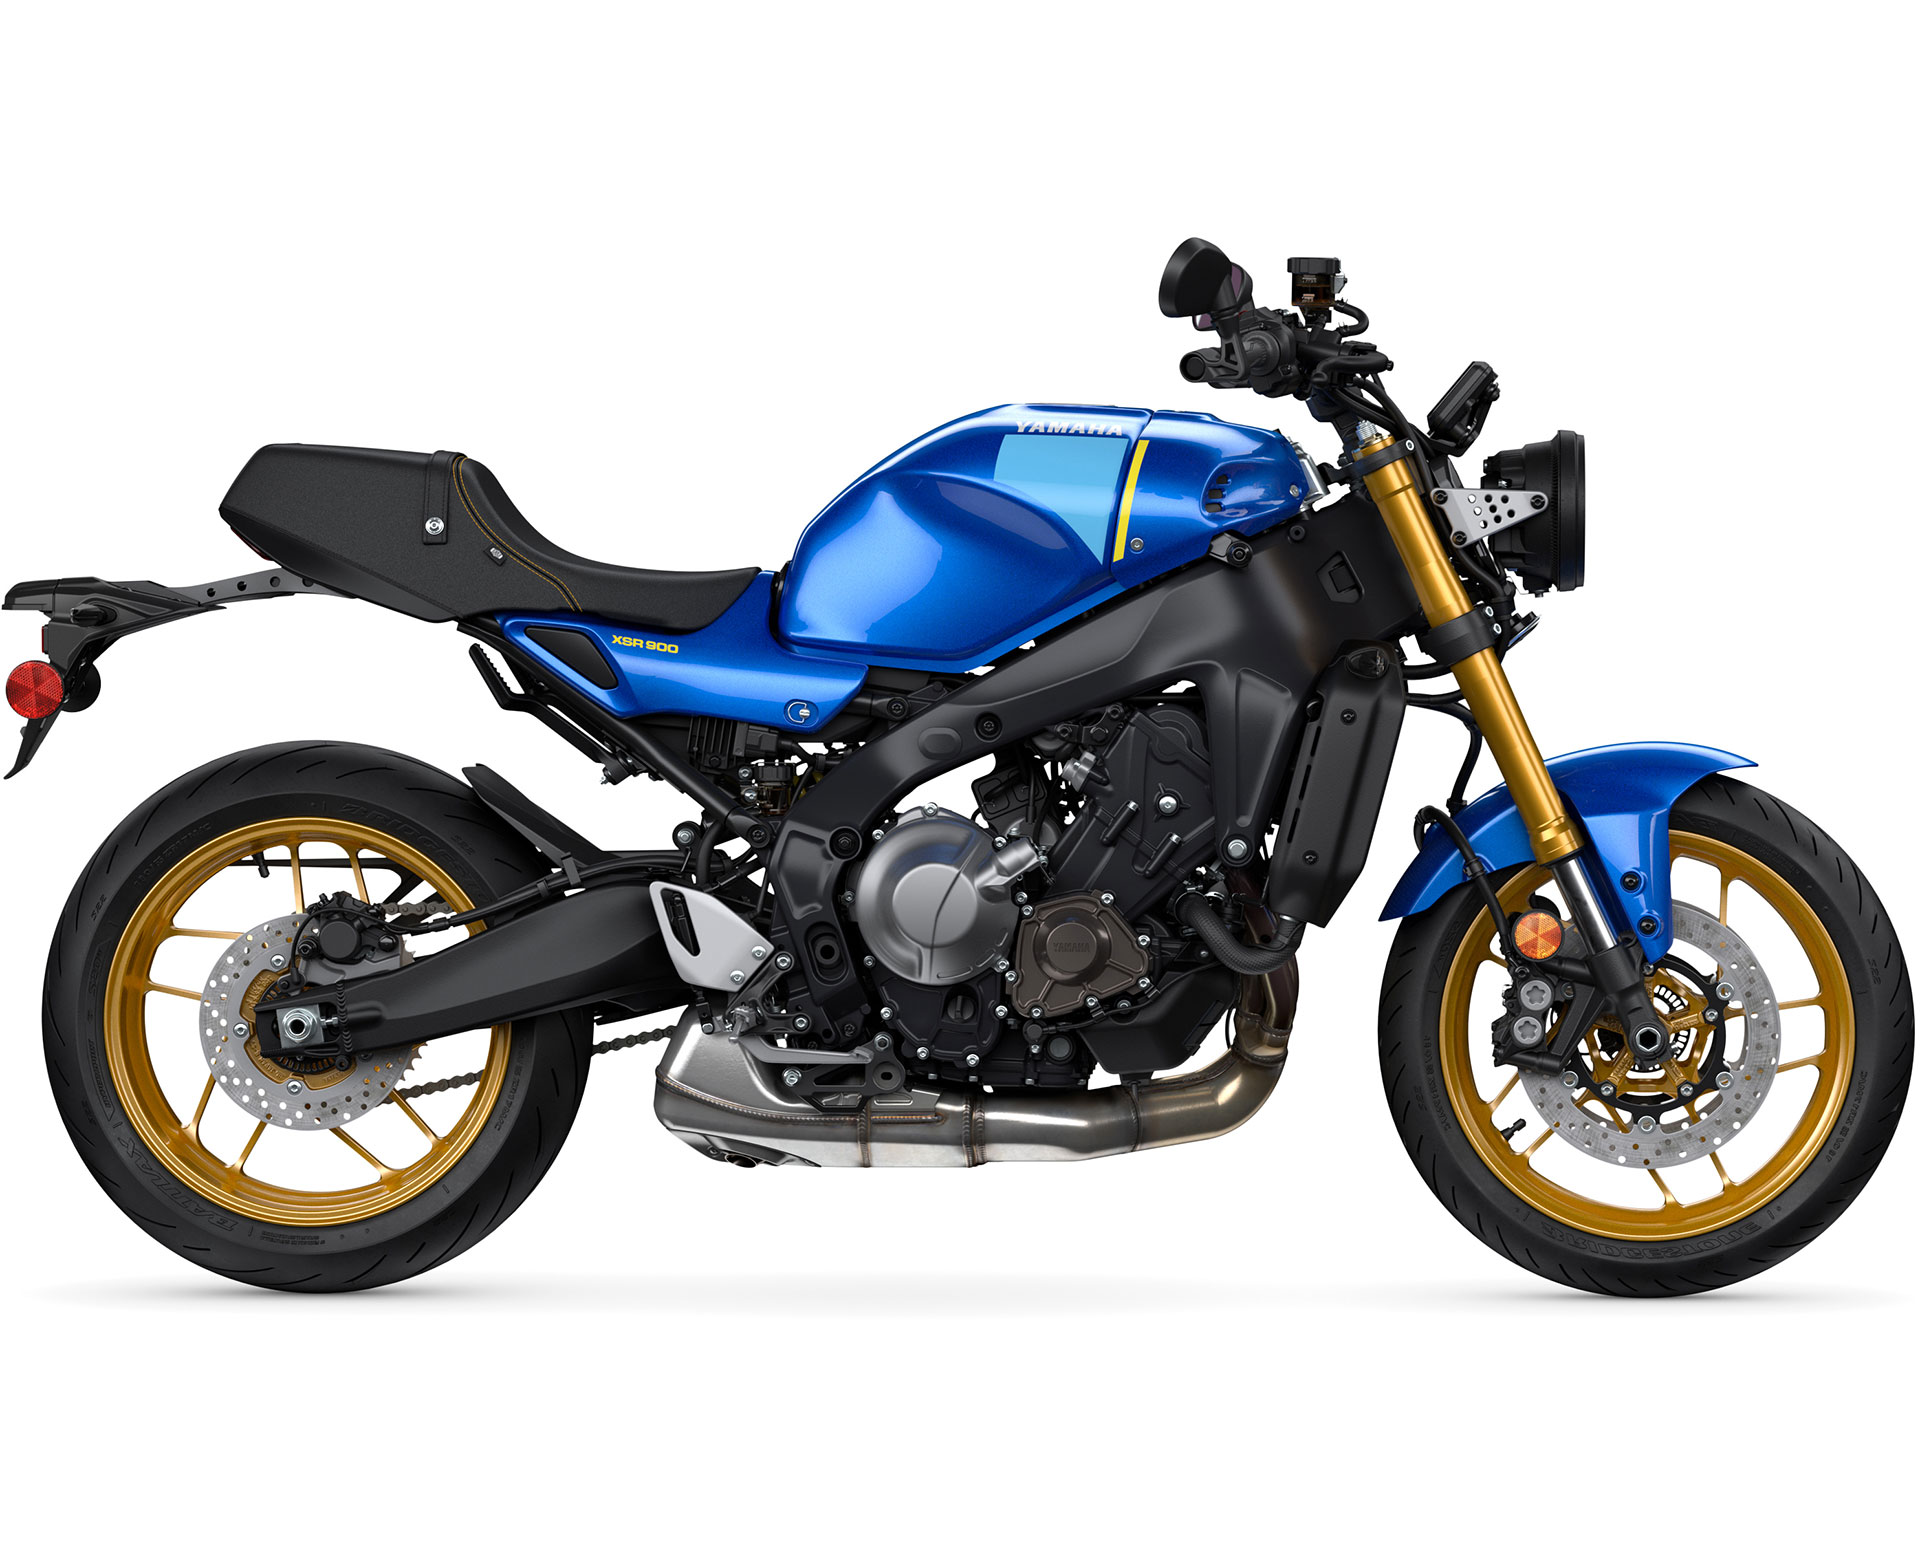 Thumbnail of your customized XSR900 2022